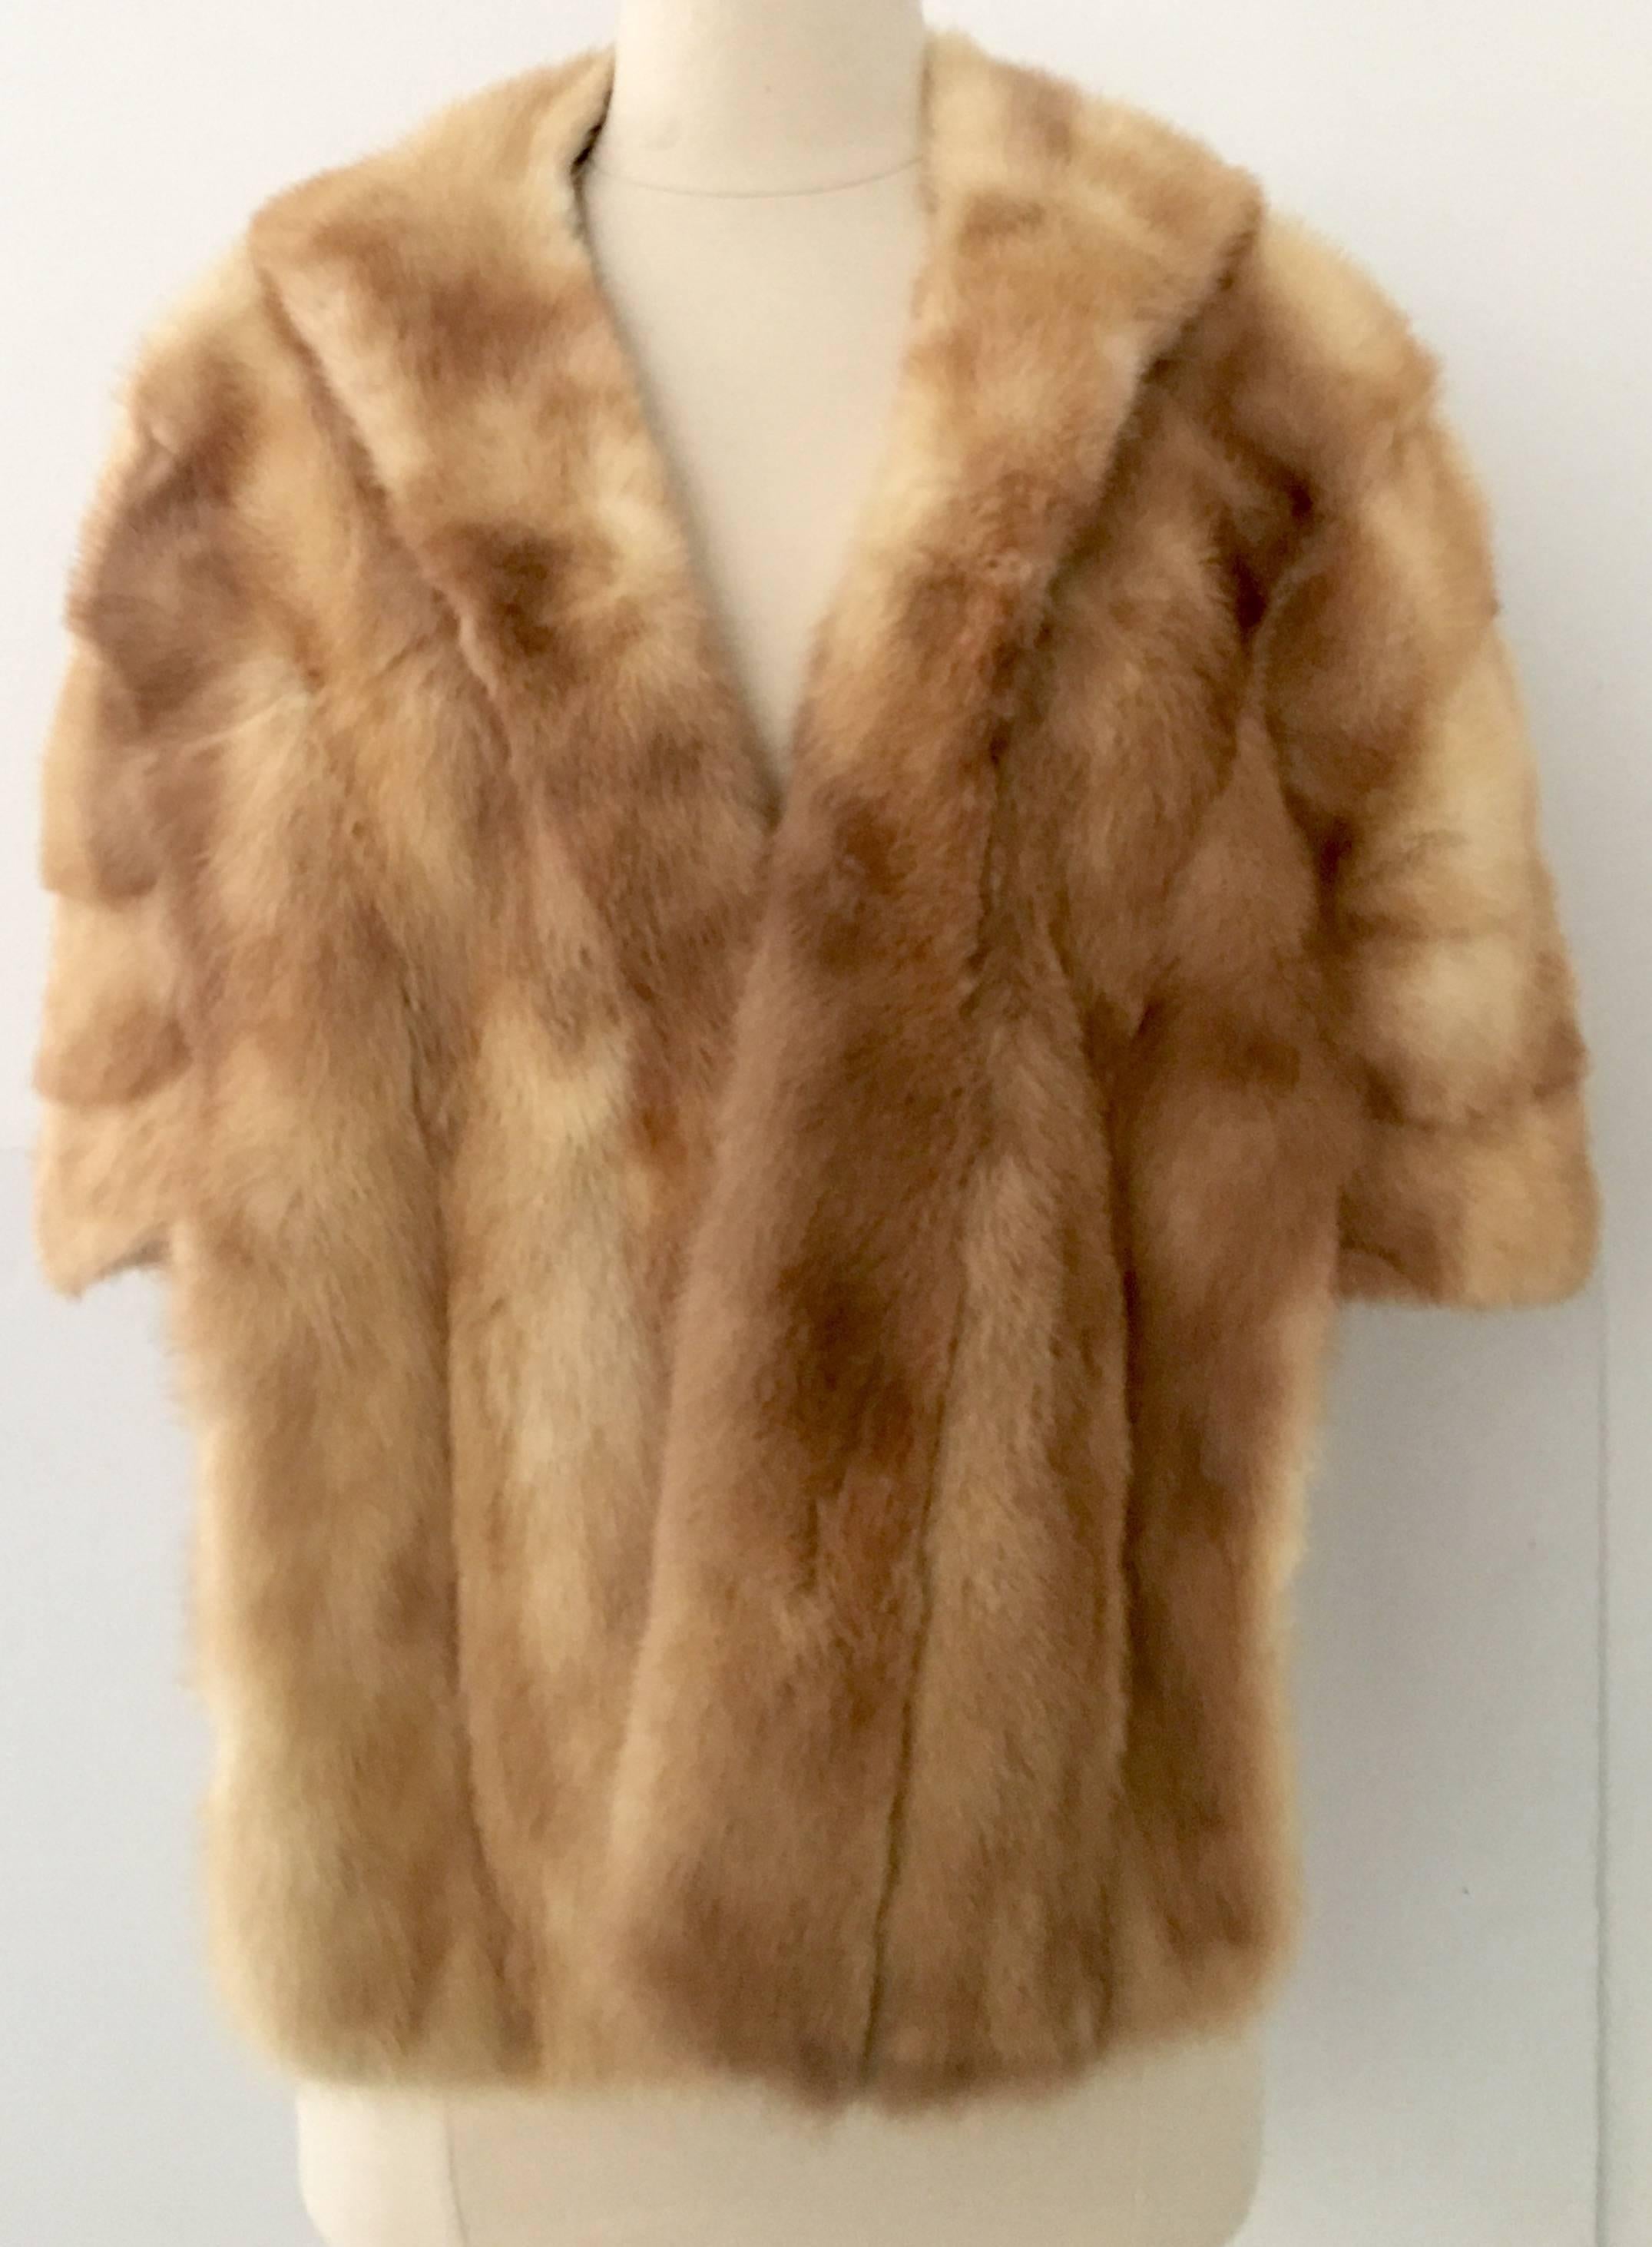 1940'S Mink Fur Capelet Jacket By Harry Kanfer Furs. This luxurious blonde mink fur jacket or cape let features 2 side slit pockets and is fully lined with the furrier tag in tact in the pristine lining. One size fits all.
Shoulder to shoulder